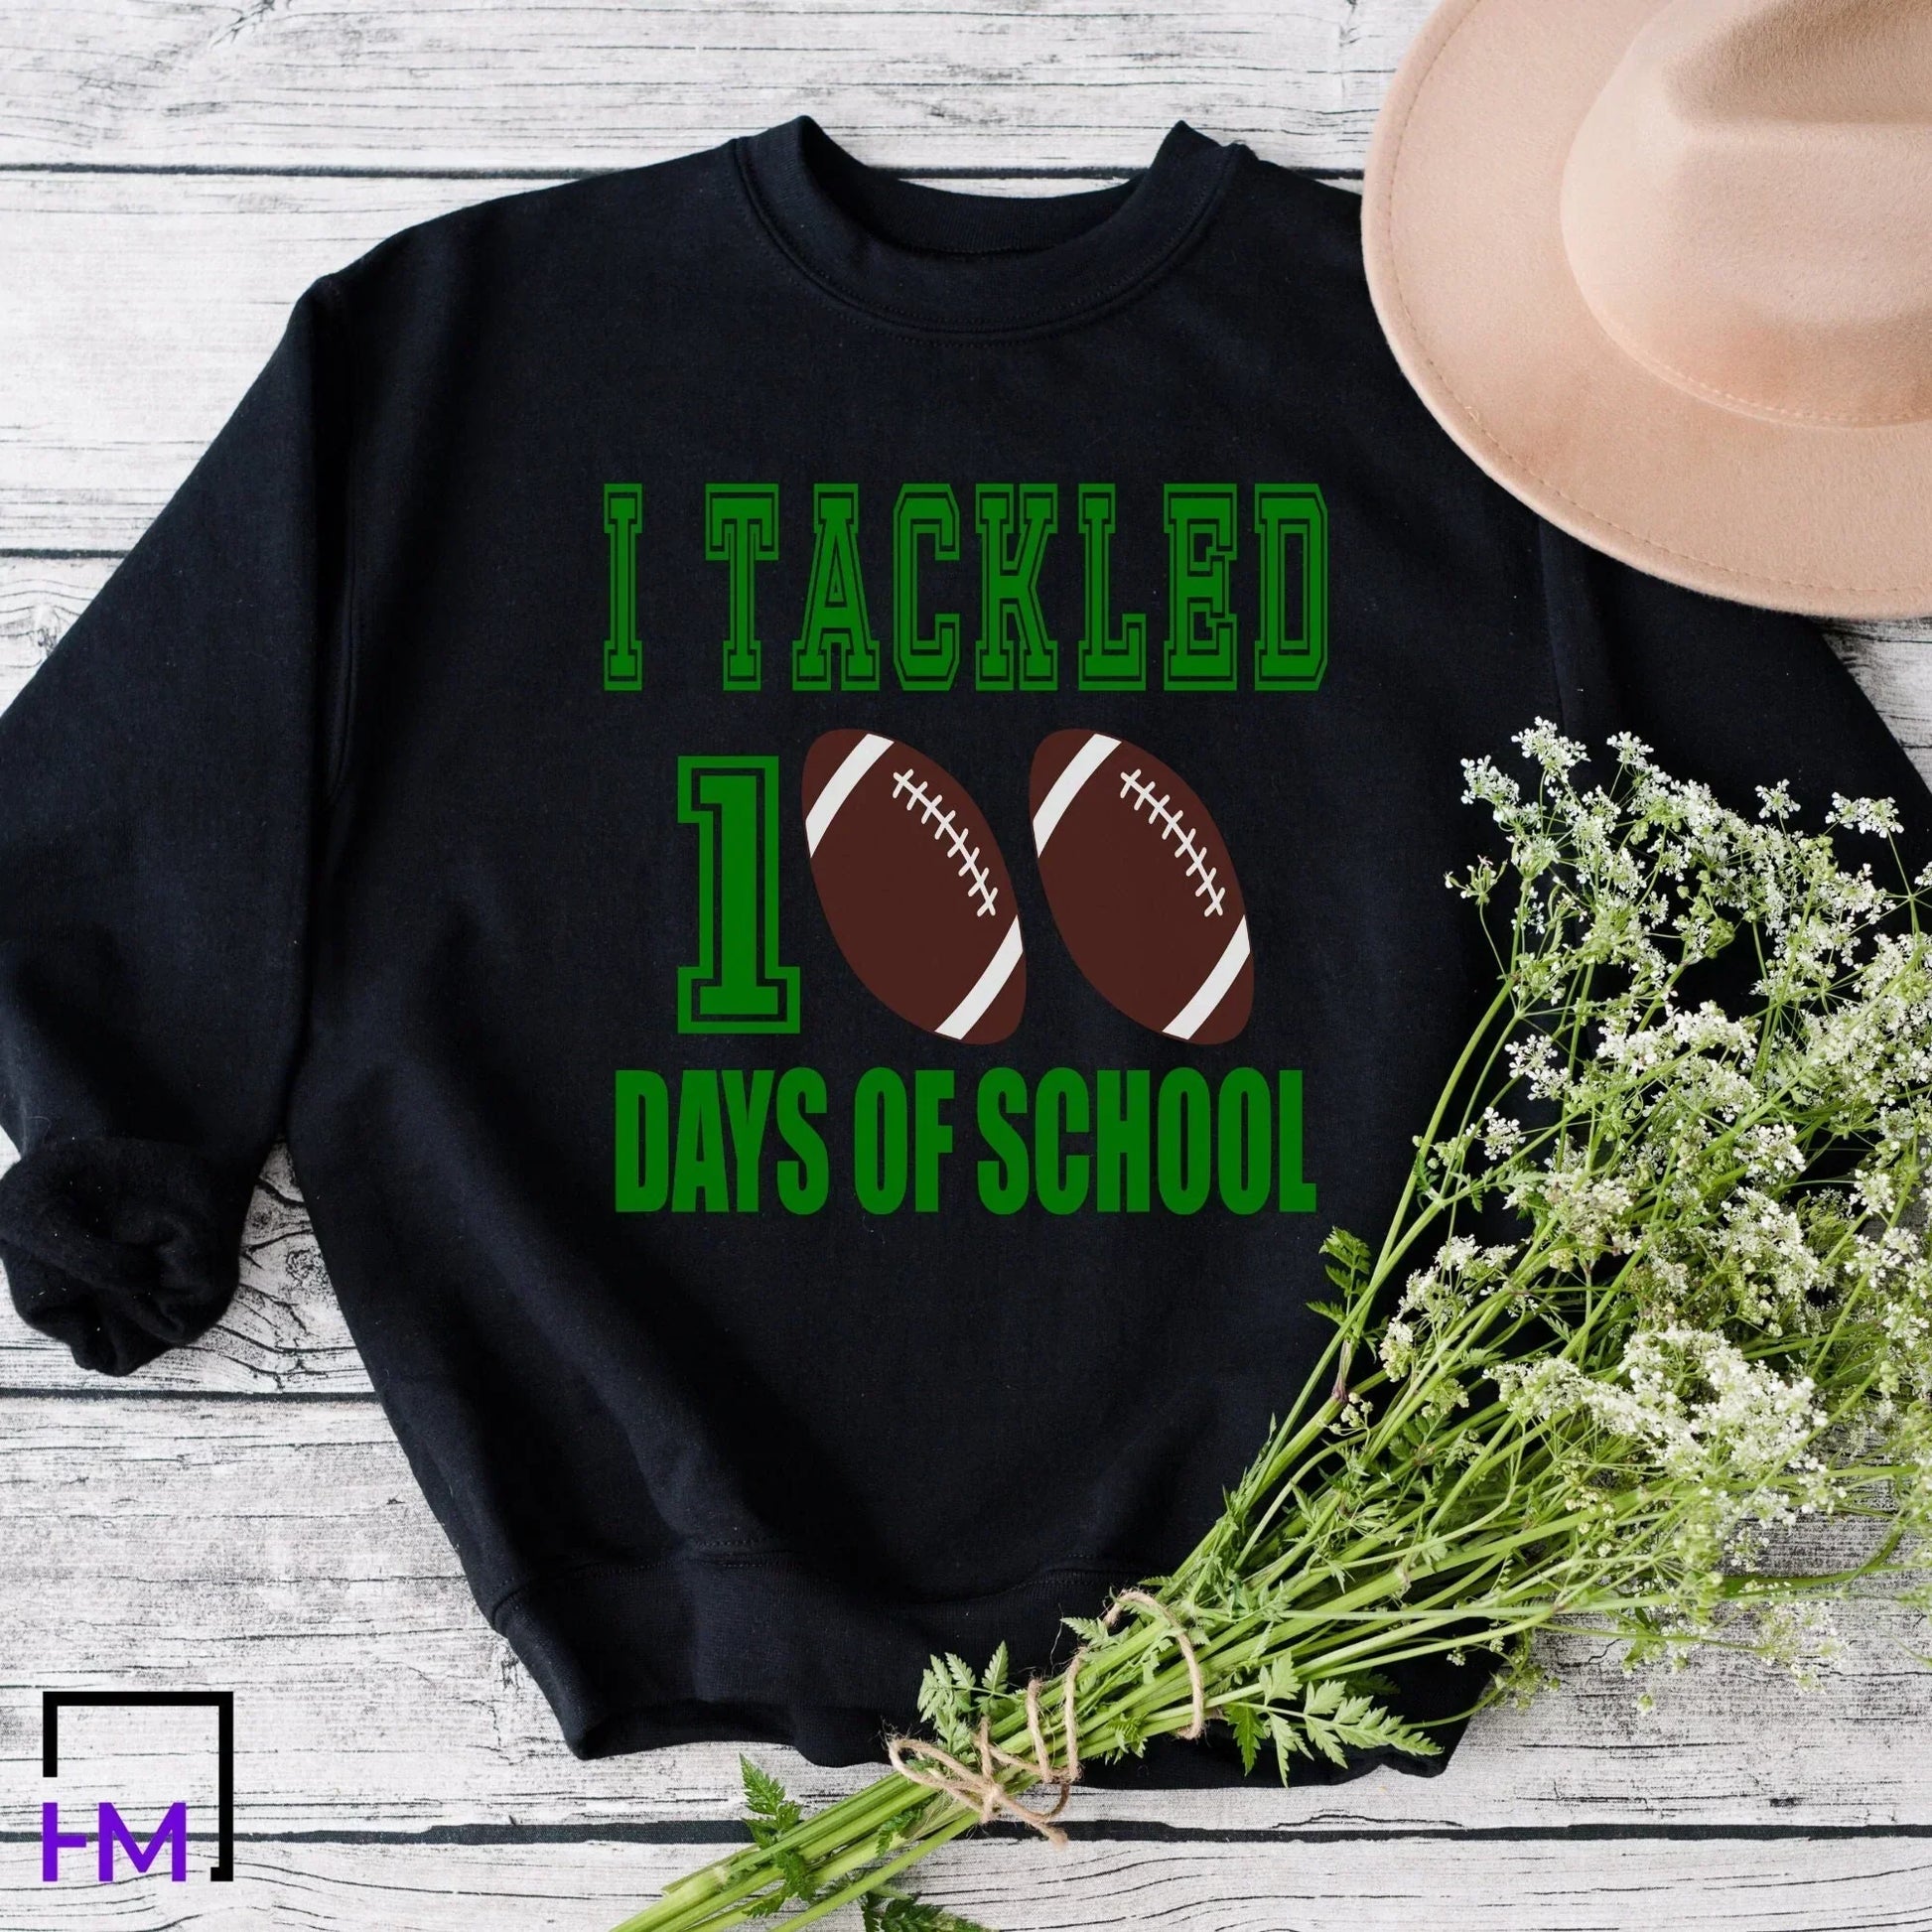 Tackled 100 Days of School Shirt